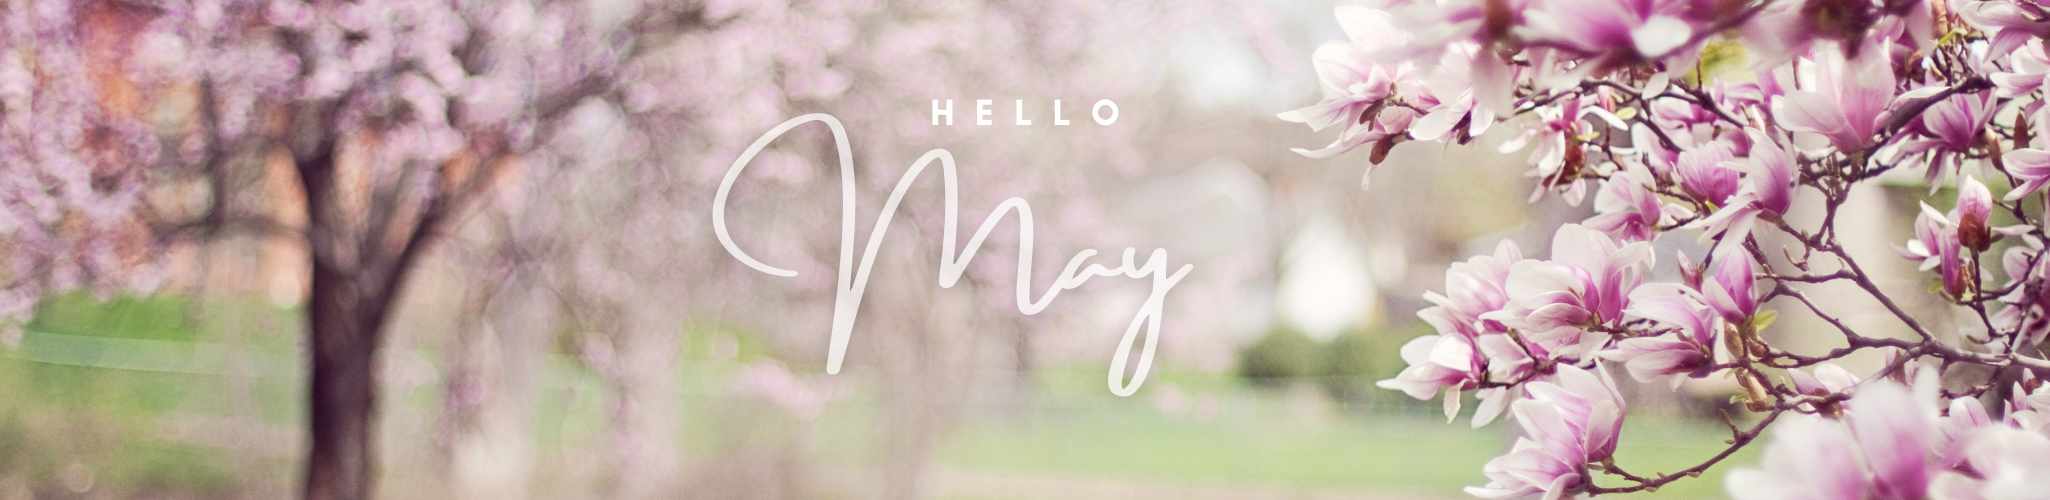 Hello May banner with cherry blossoms